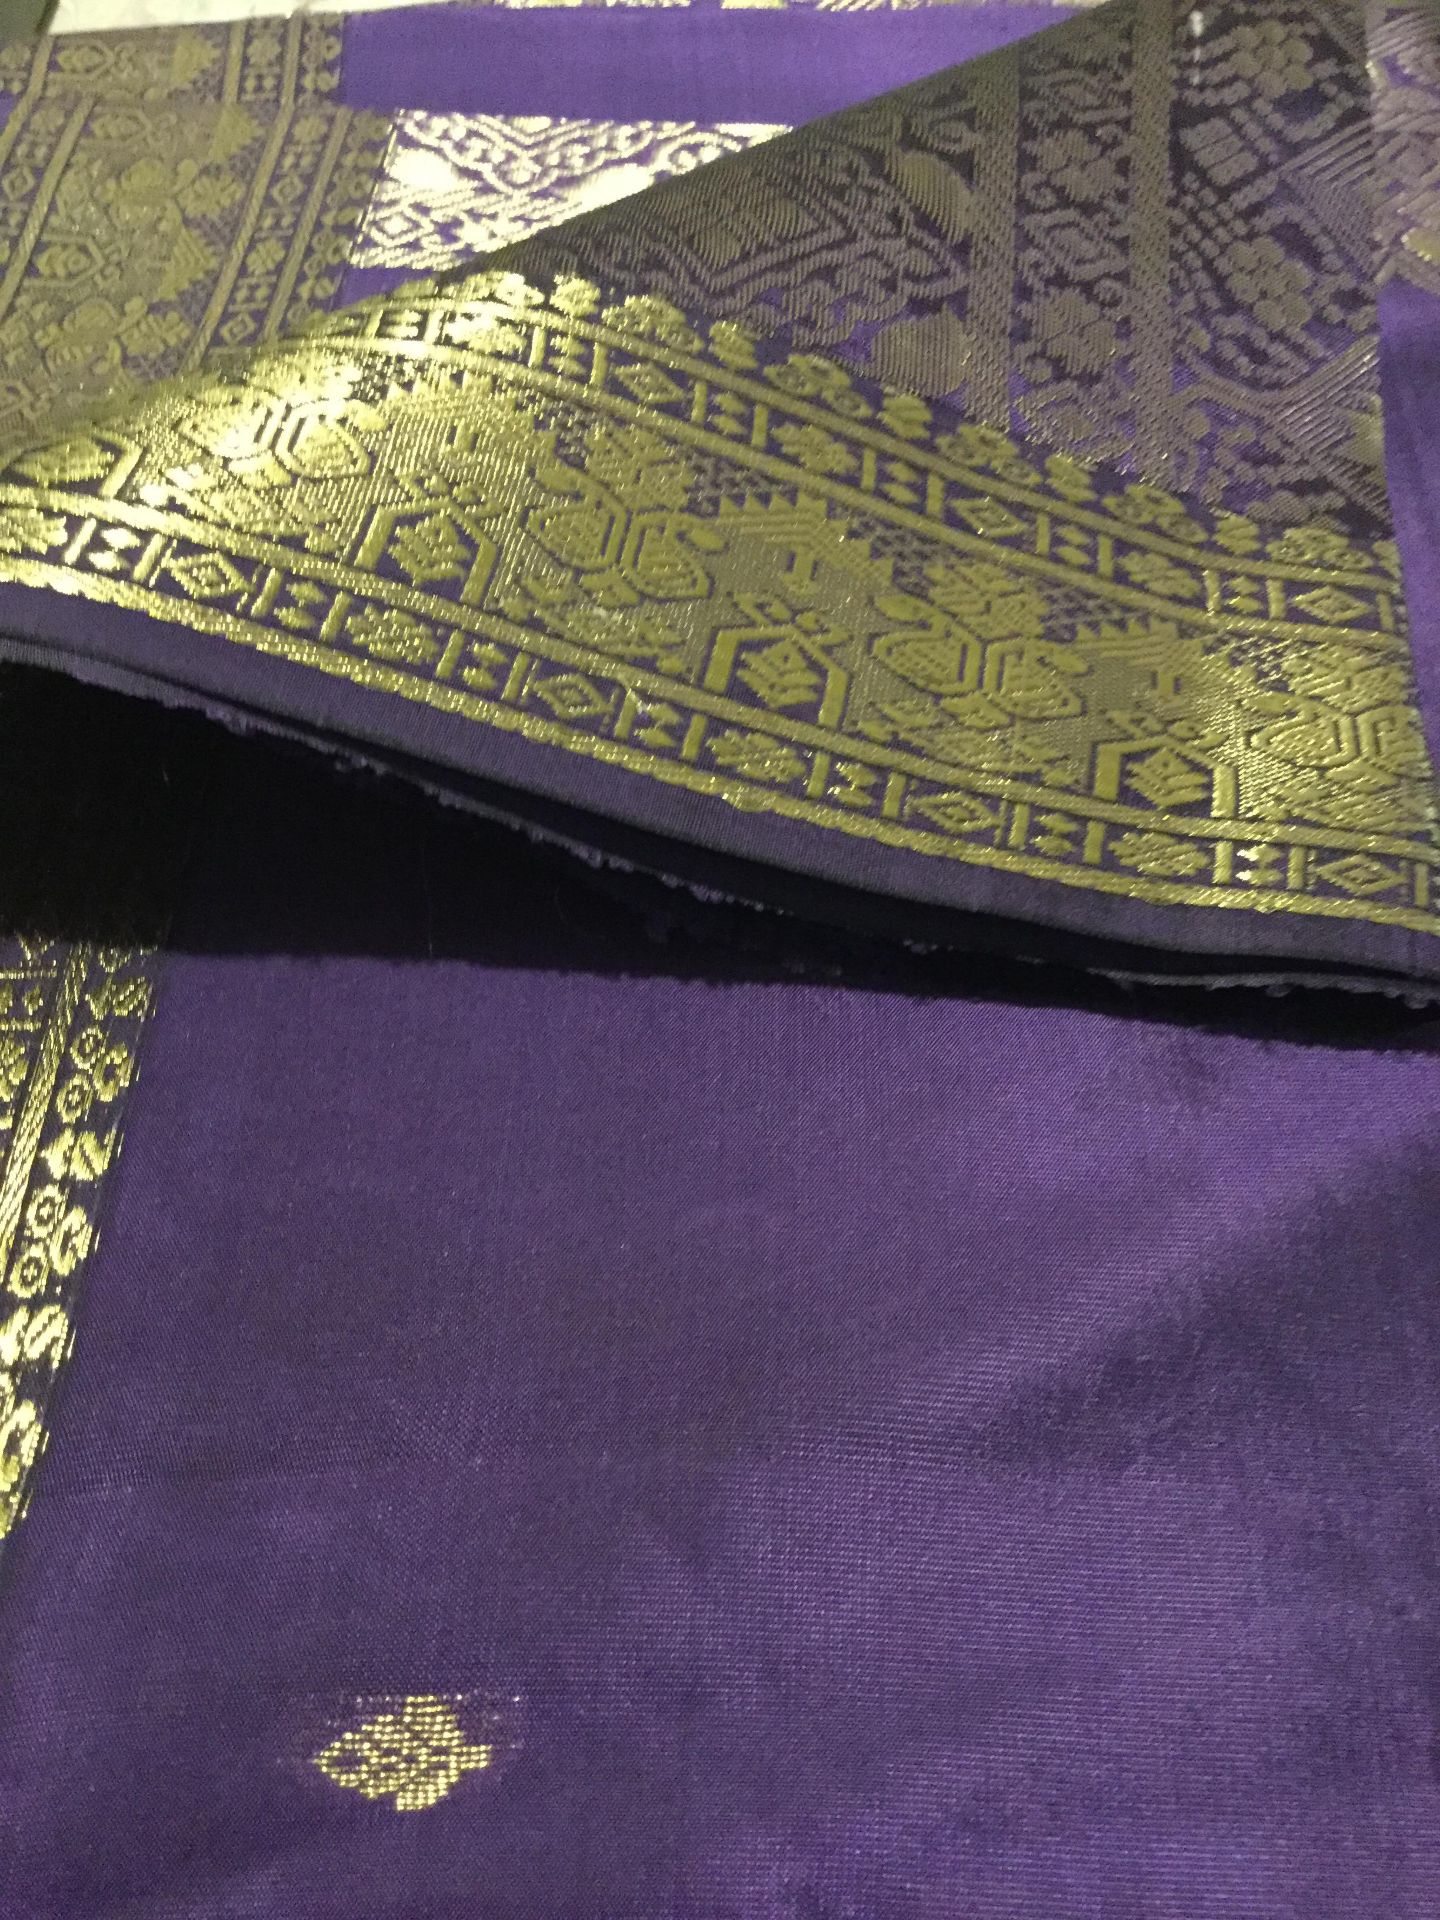 Silk Saree Fabric in purple with Gold detail Brand new